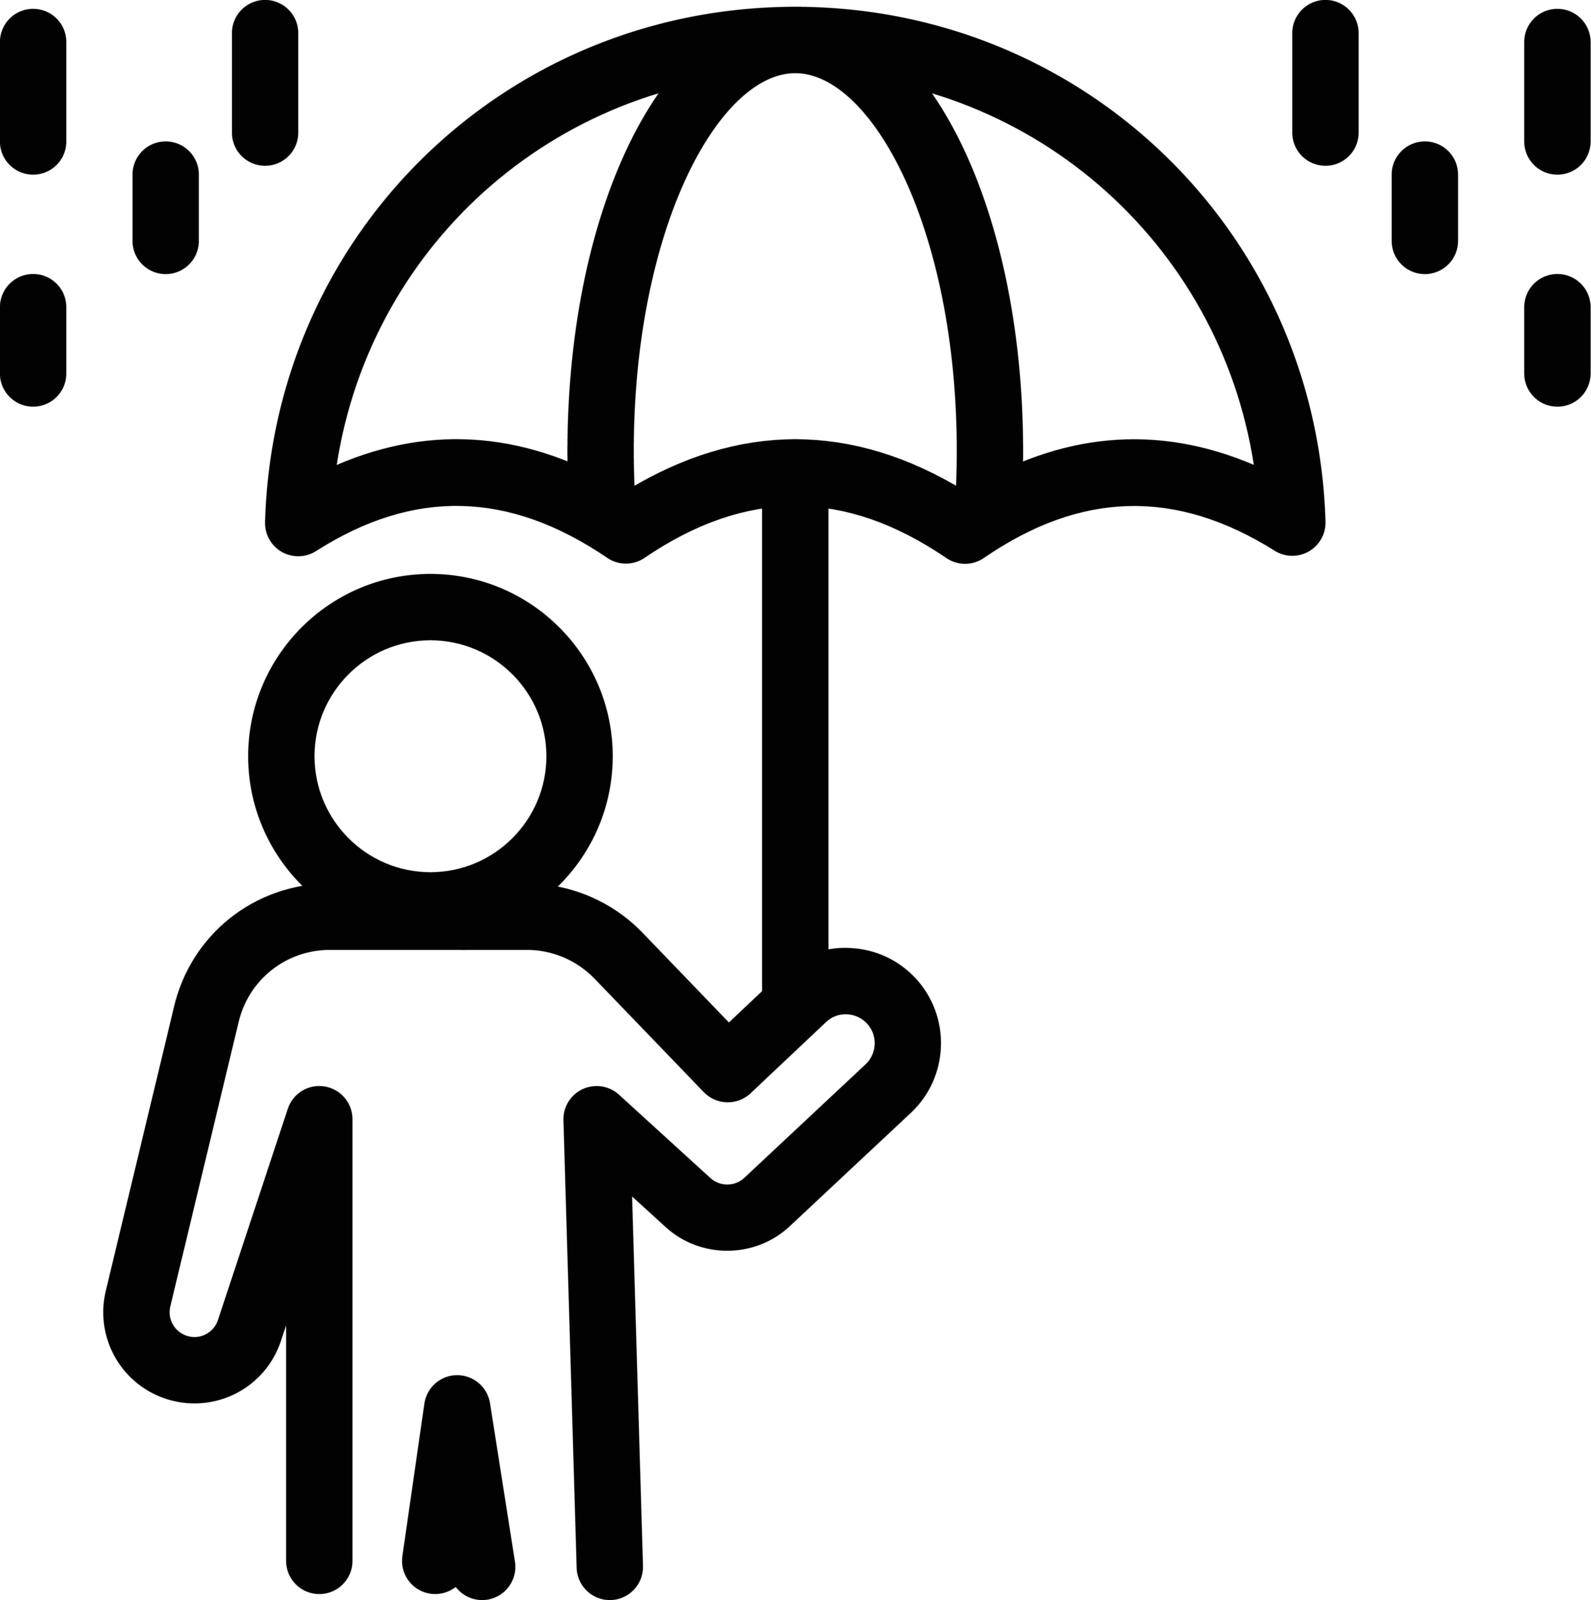 umbrella Vector illustration on a transparent background. Premium quality symmbols. Thin line vector icons for concept and graphic design.